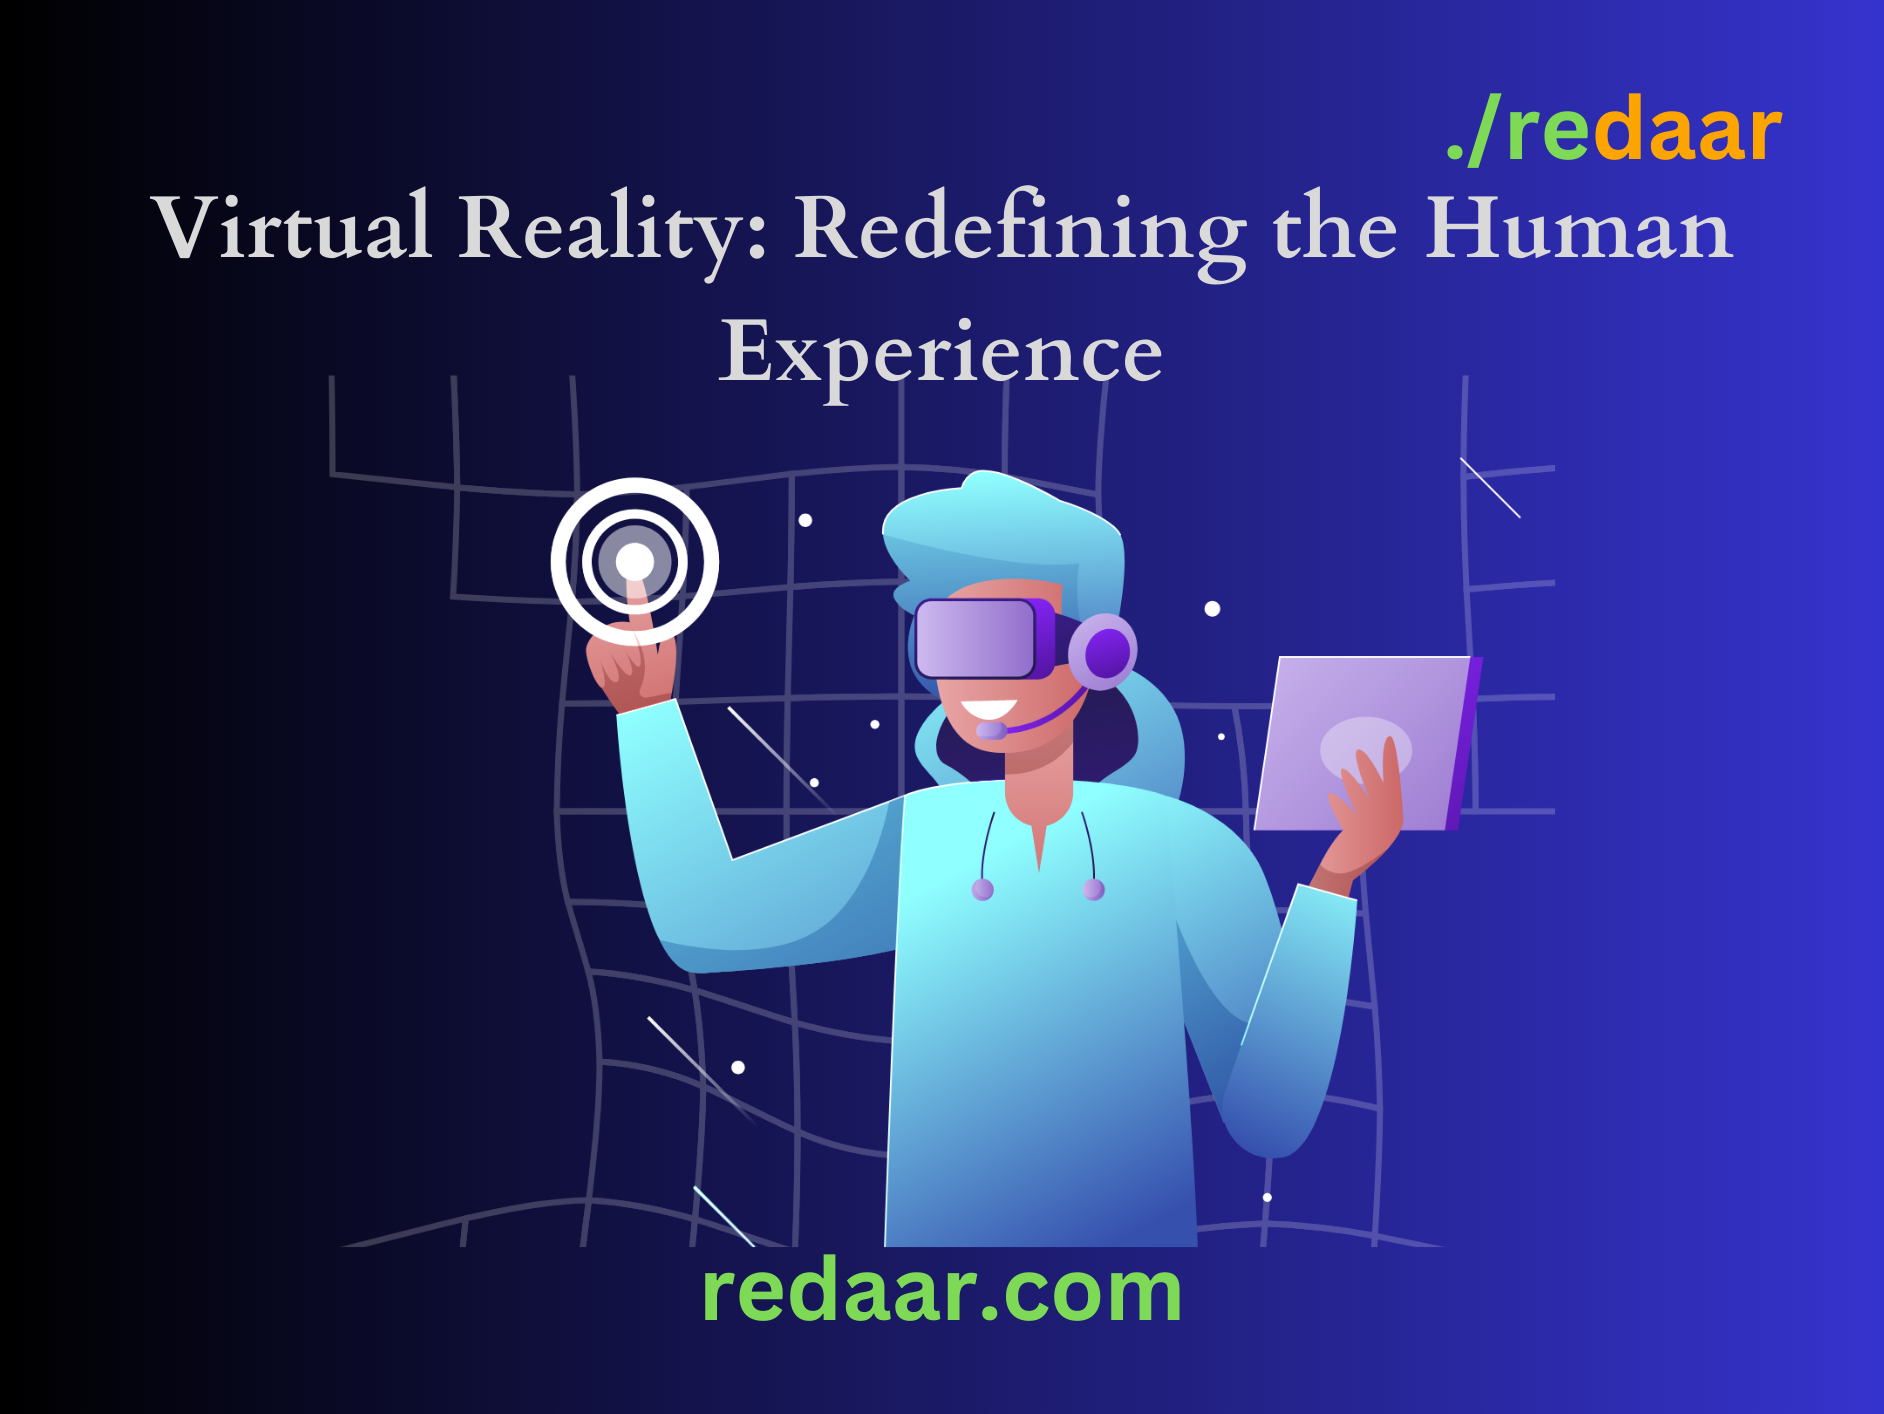 Virtual Reality: Redefining the Human Experience